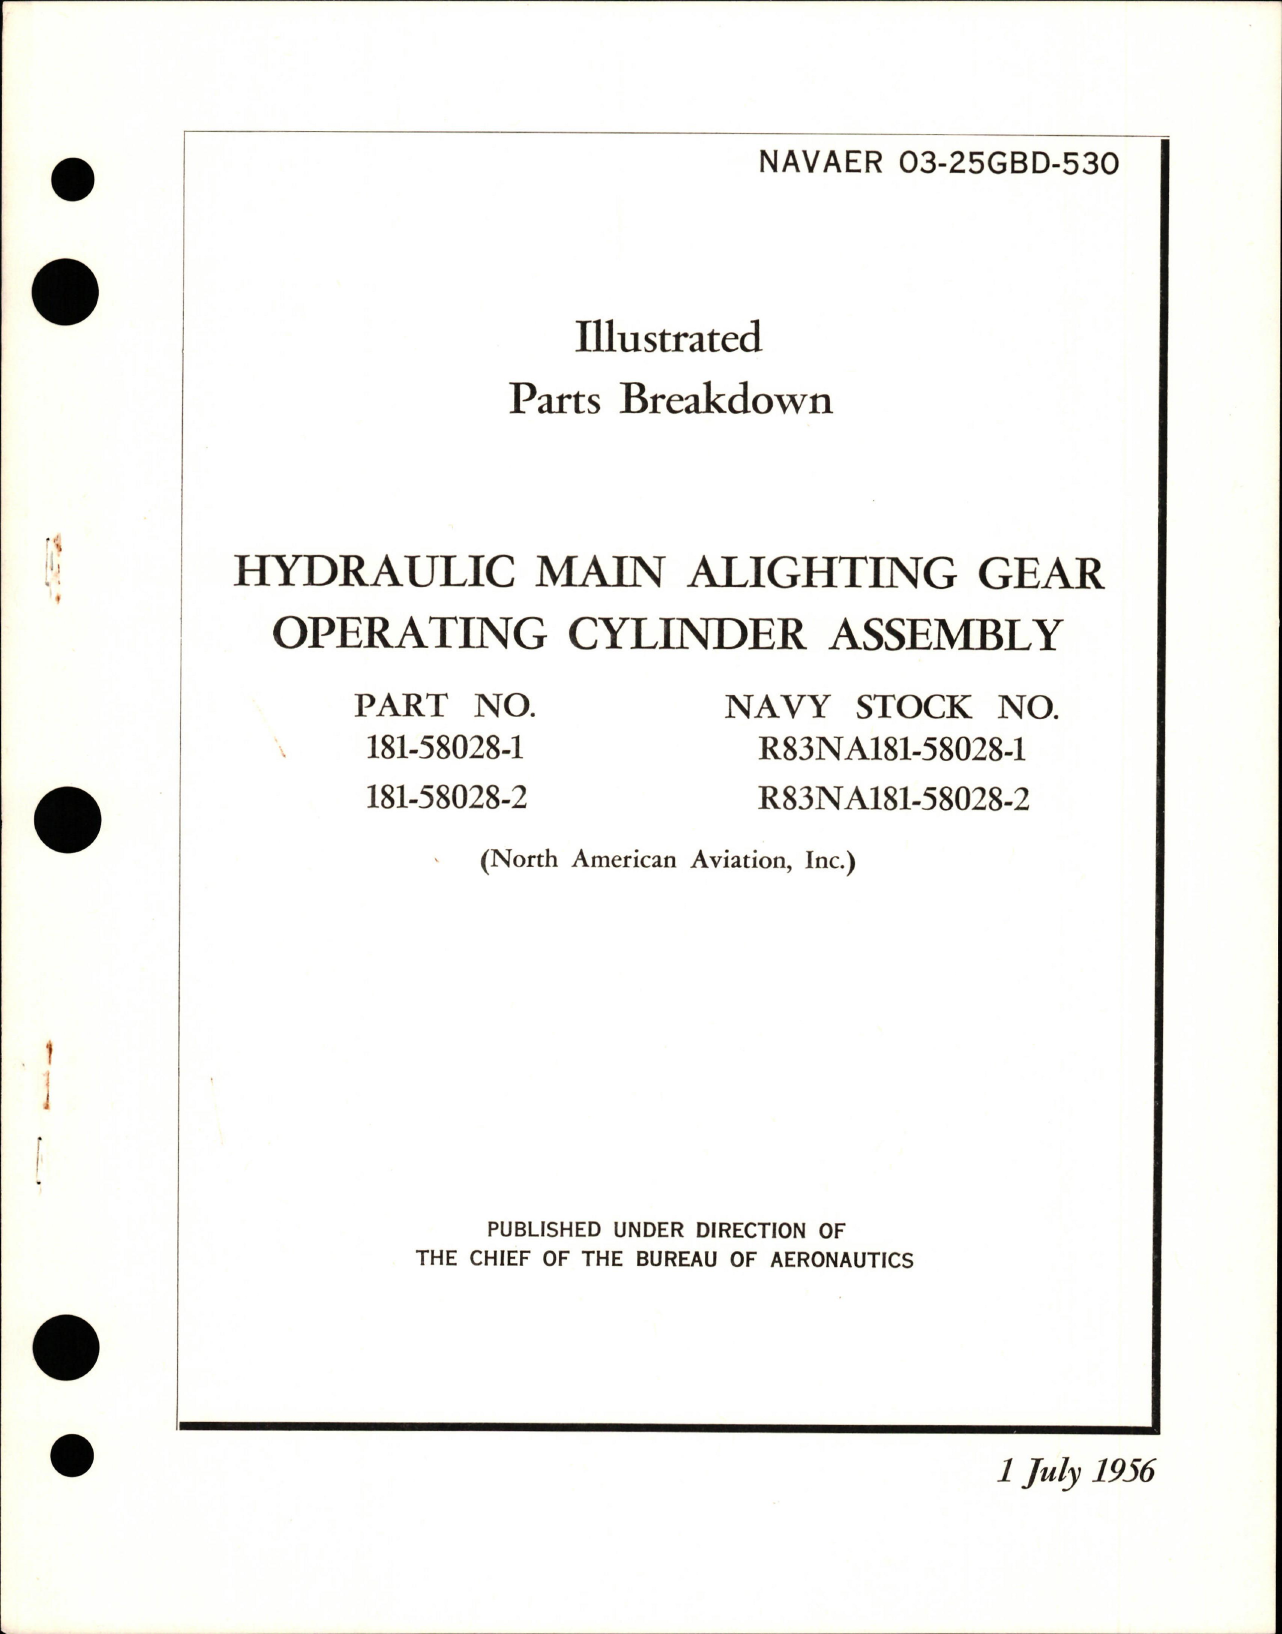 Sample page 1 from AirCorps Library document: Illustrated Parts Breakdown for Hydraulic Main Alighting Gear Operating Assembly - Parts 181-58028-1 and 181-58028-2 